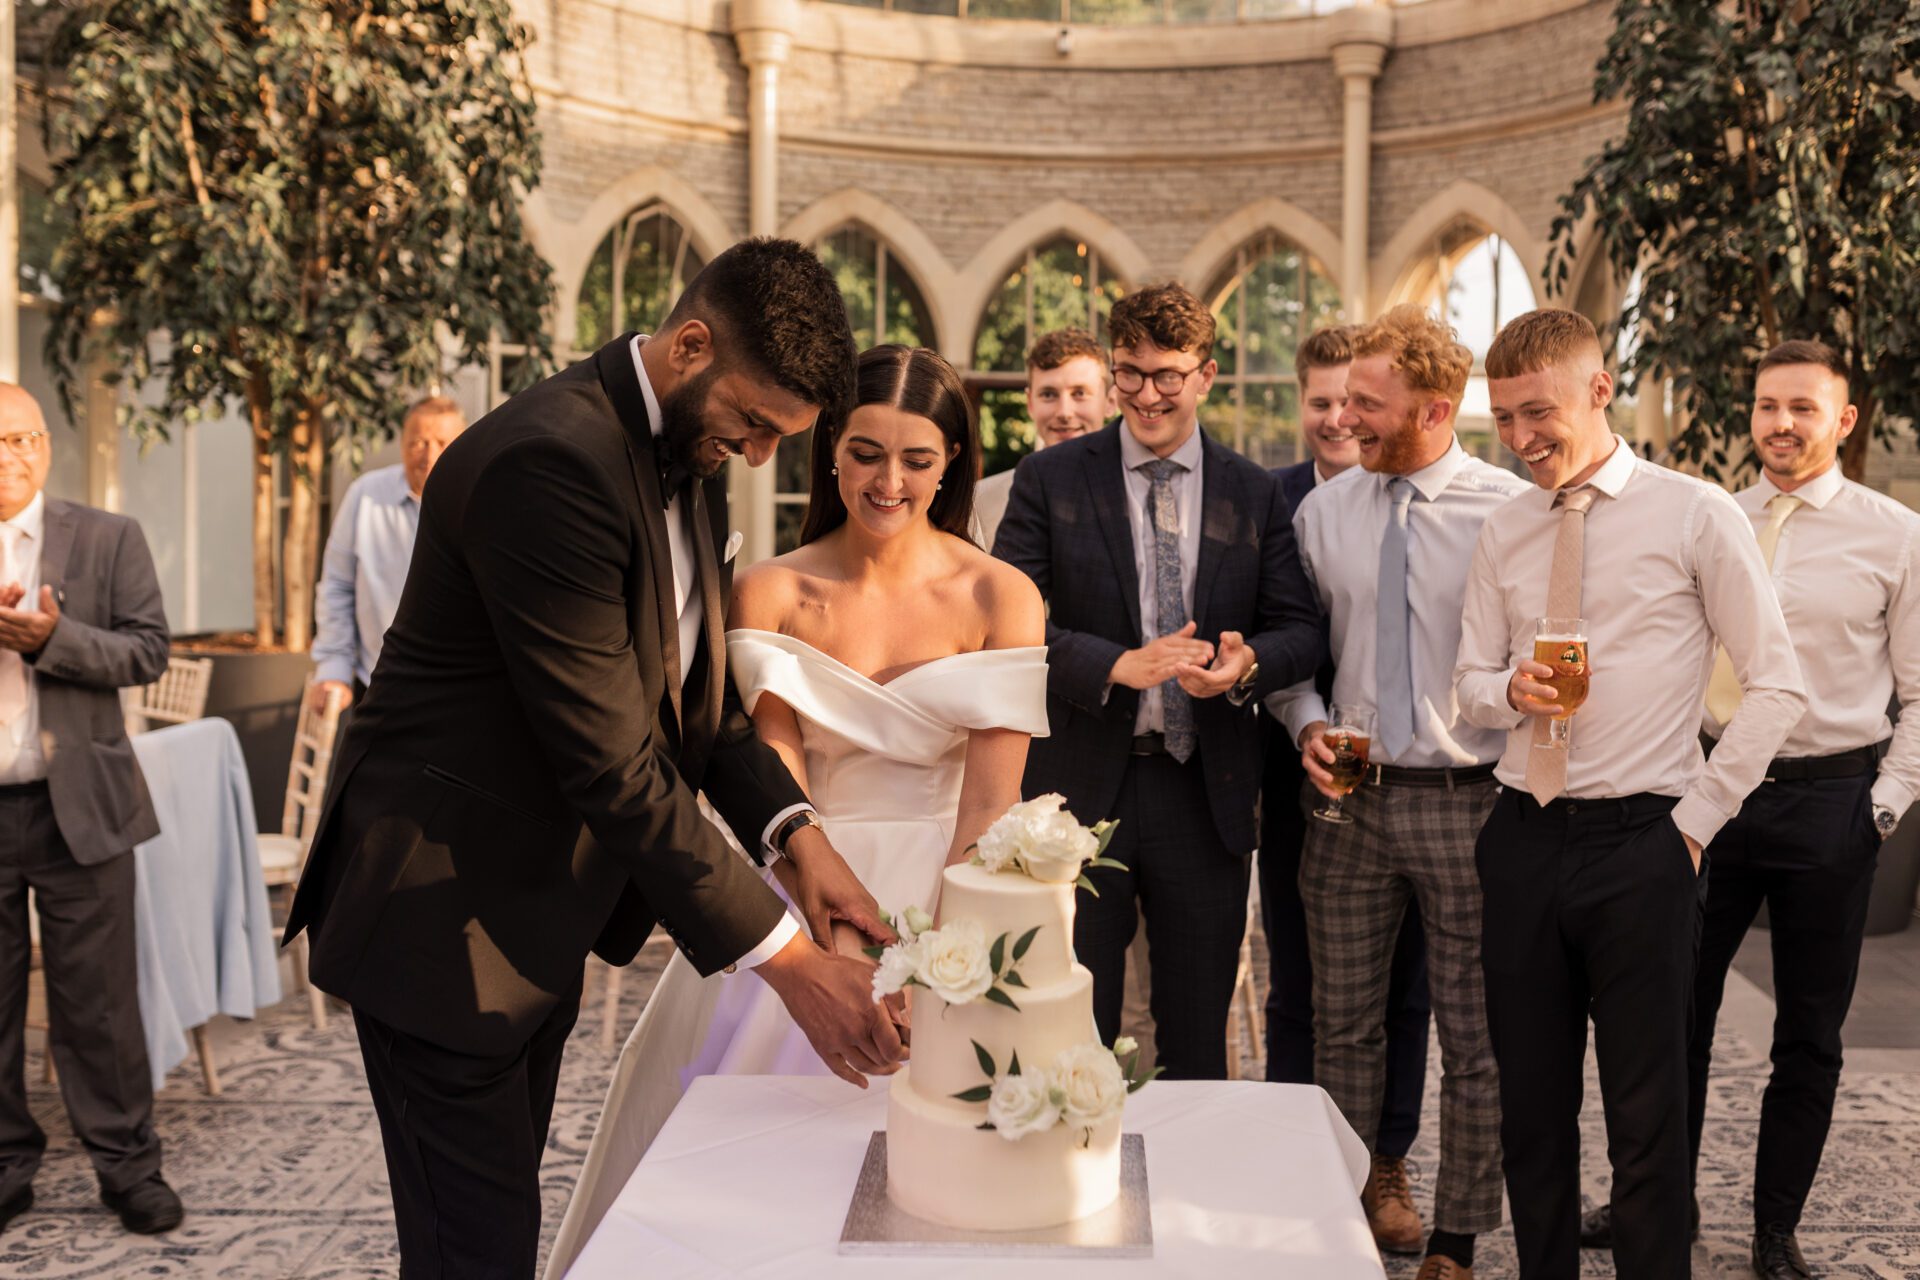 Cake cutting in the Orangery at Tortworth Court